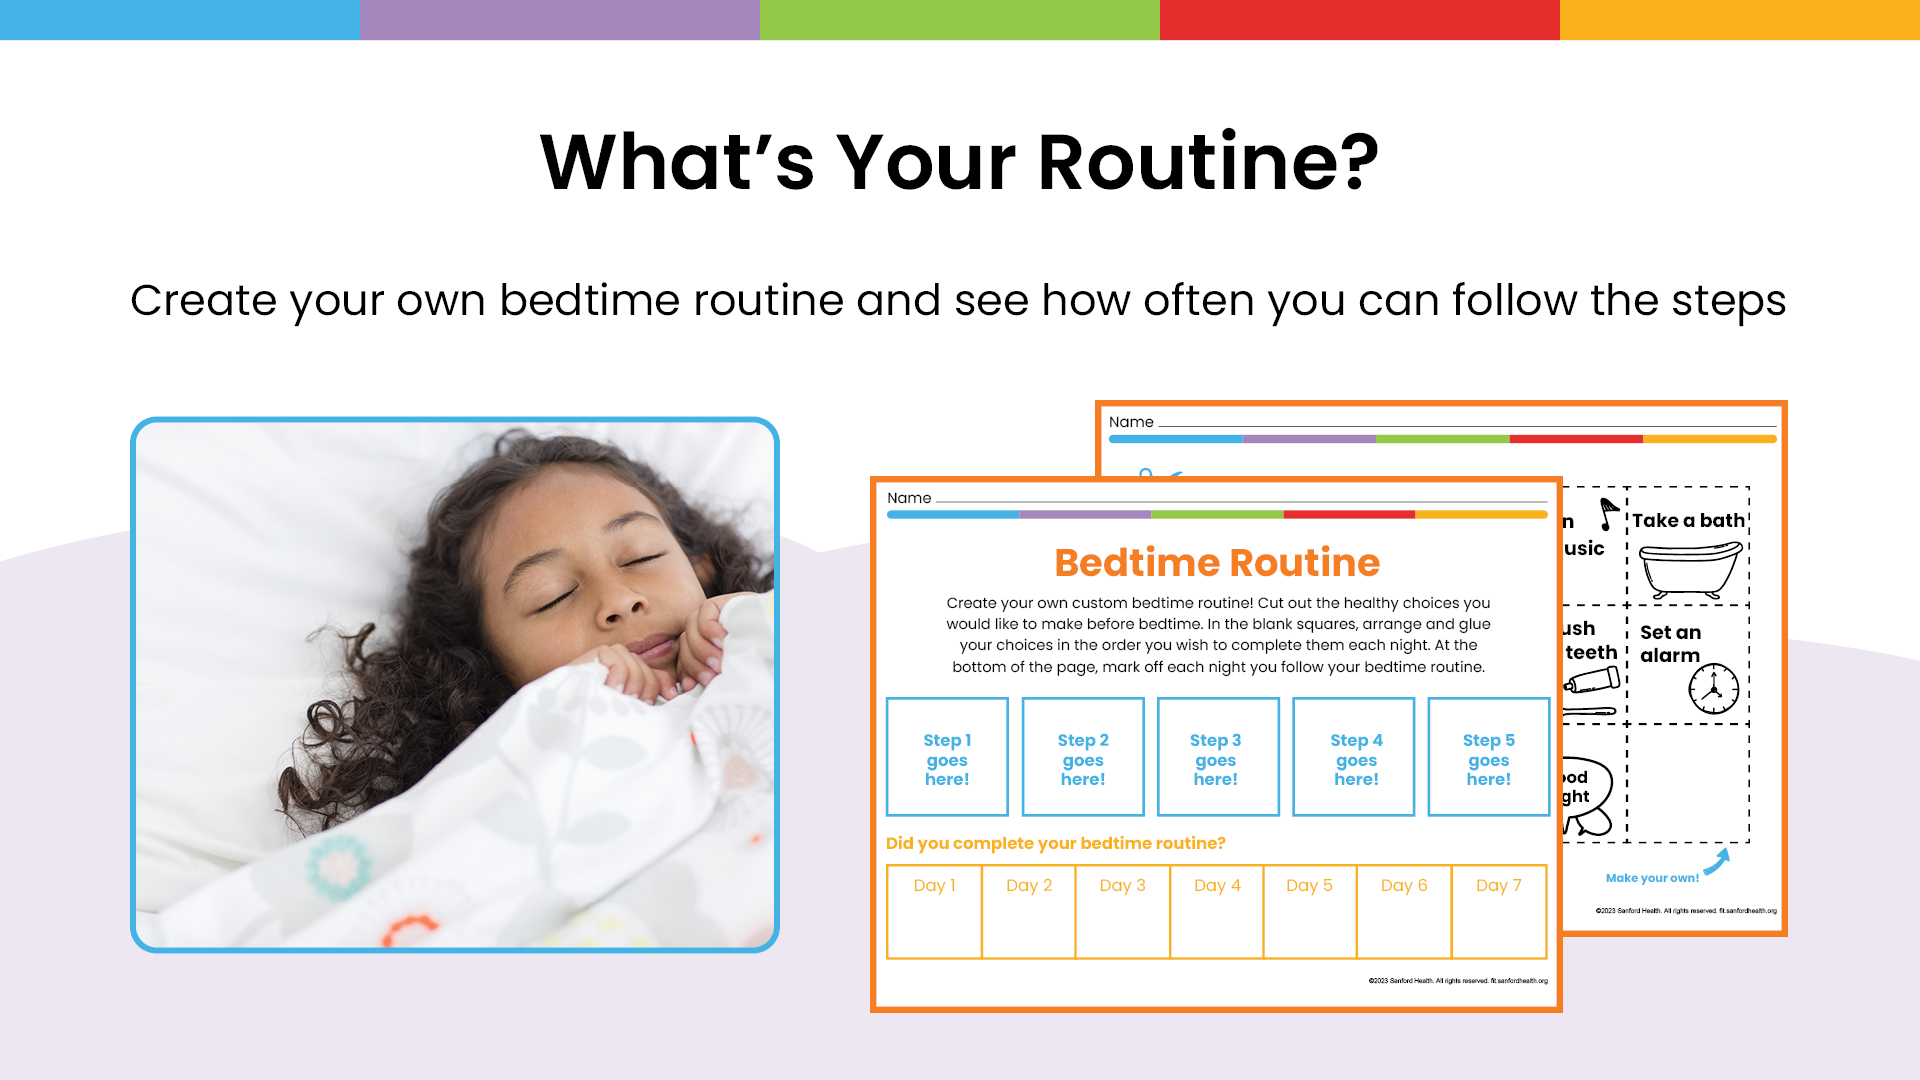 child sleeping and fit printables featured on right side - Sanford fit